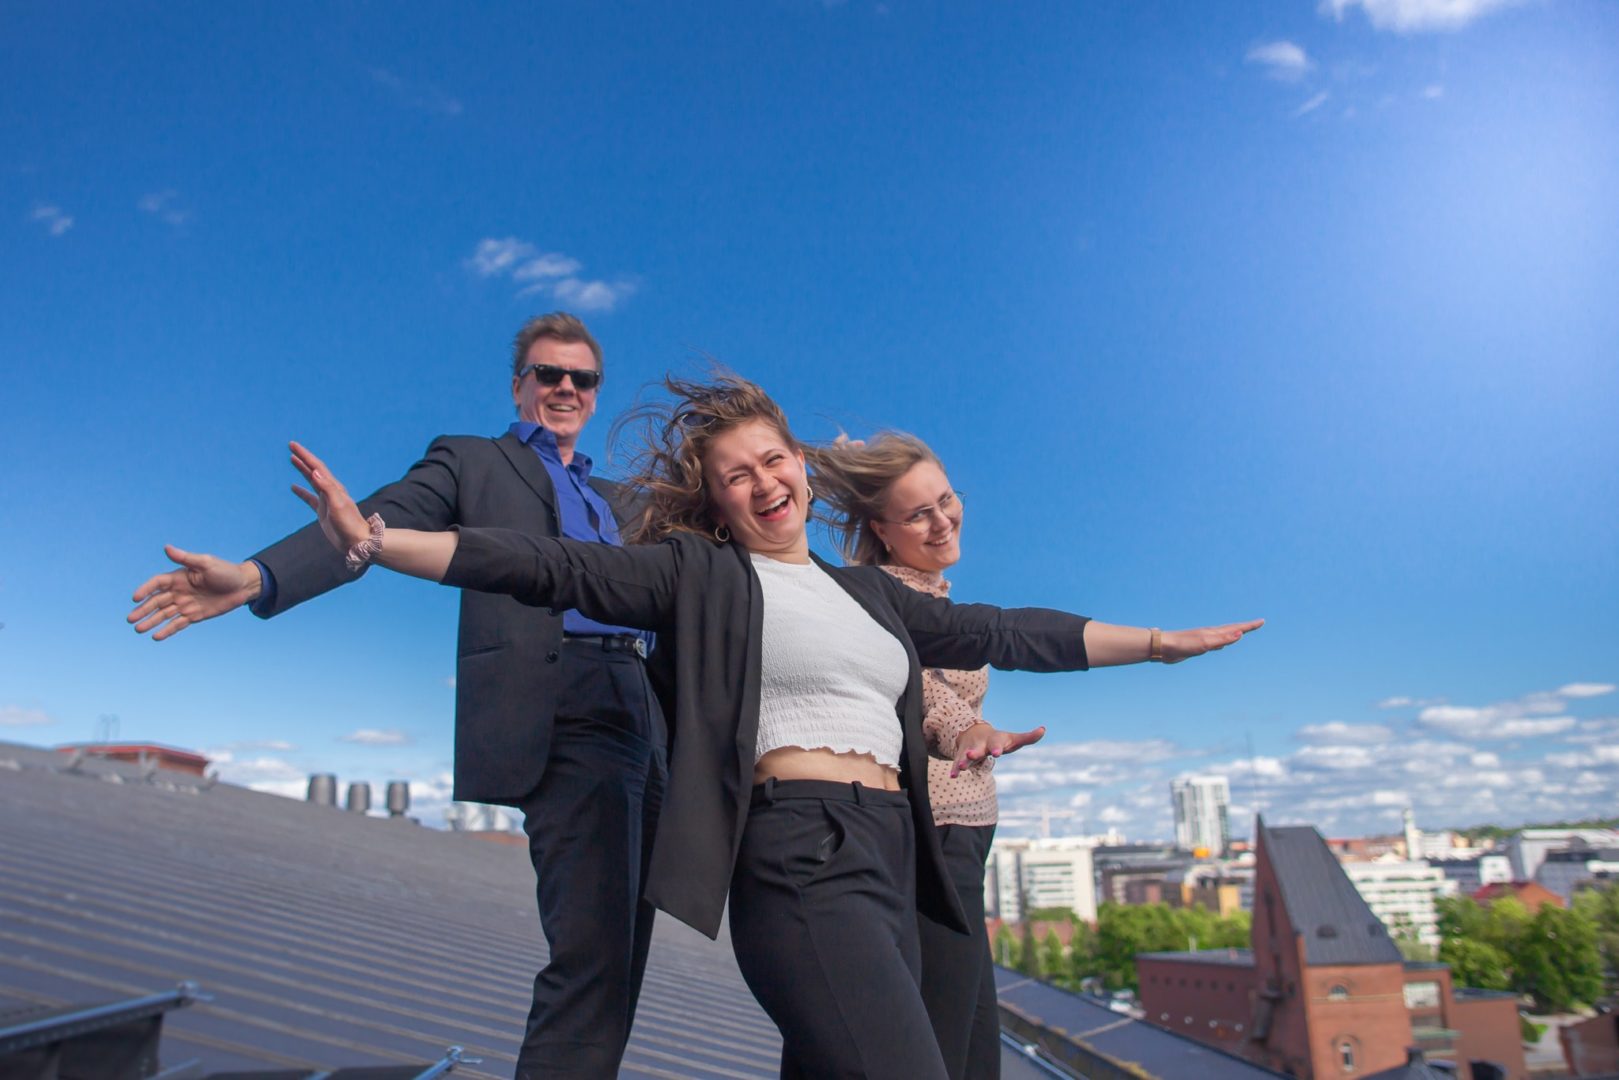 roof walk business flying laura vanzo visit tampere 12 1